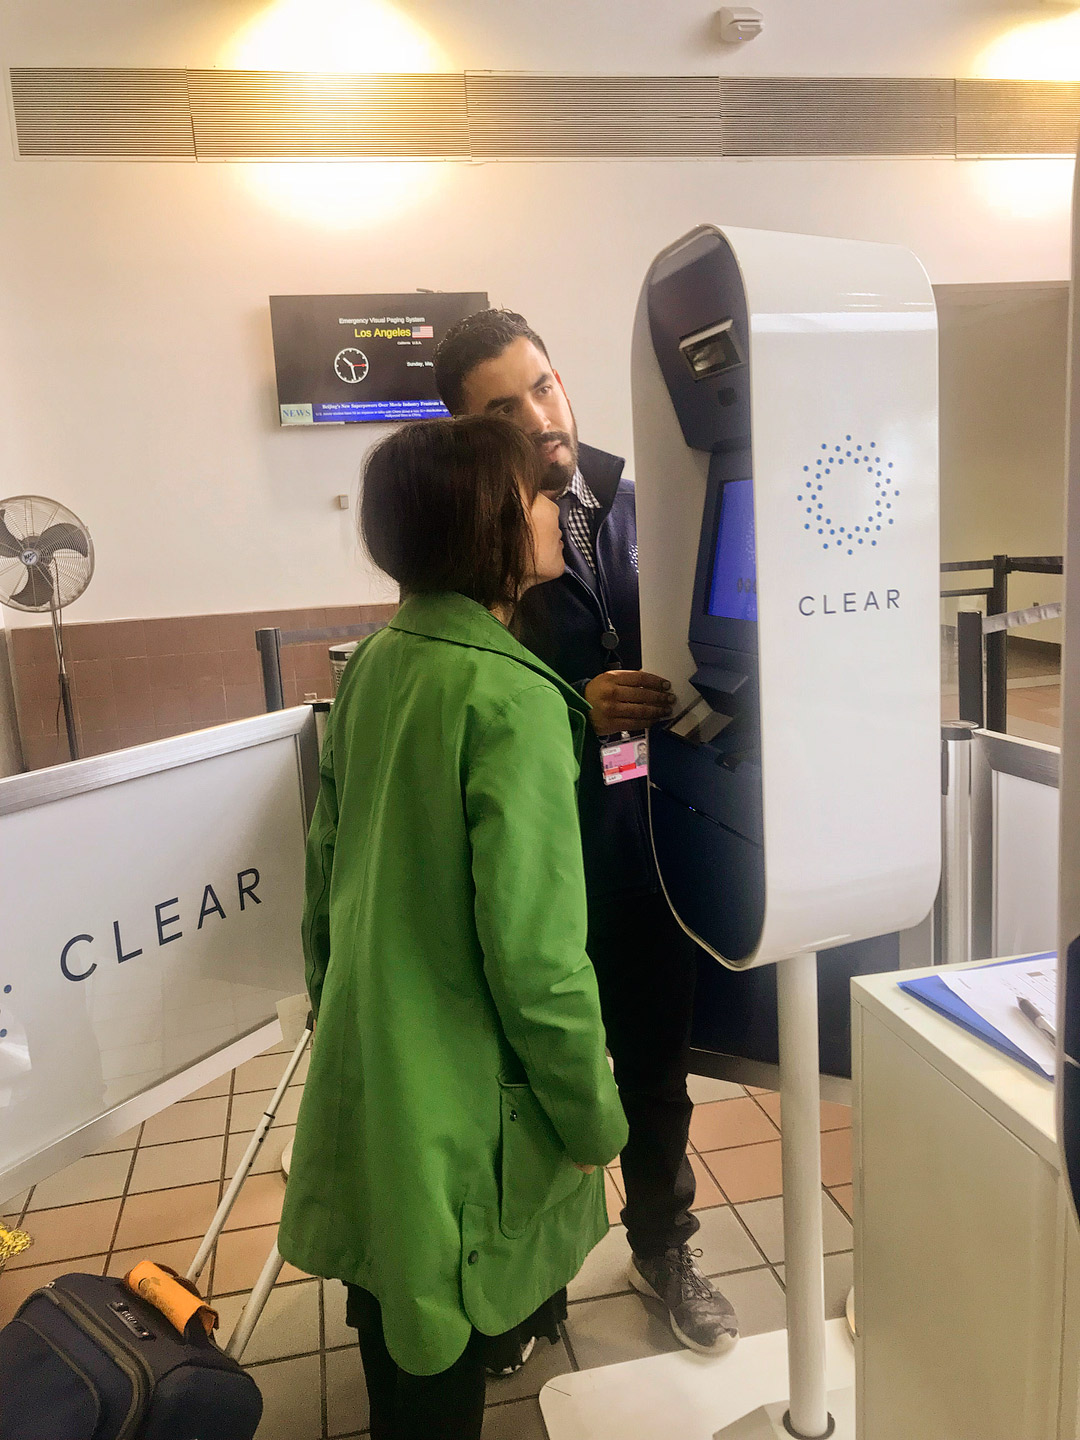 Thinking about getting Clear? Save this pin and click through to see our guide on how to breeze through airport security like a boss the differences between Clearme vs TSA Precheck, how and where to apply for TSA Precheck and Clear, cost, and more // Local Adventurer #clear #airport #traveltips #localadventurer #travel #travelpro #travelblogger